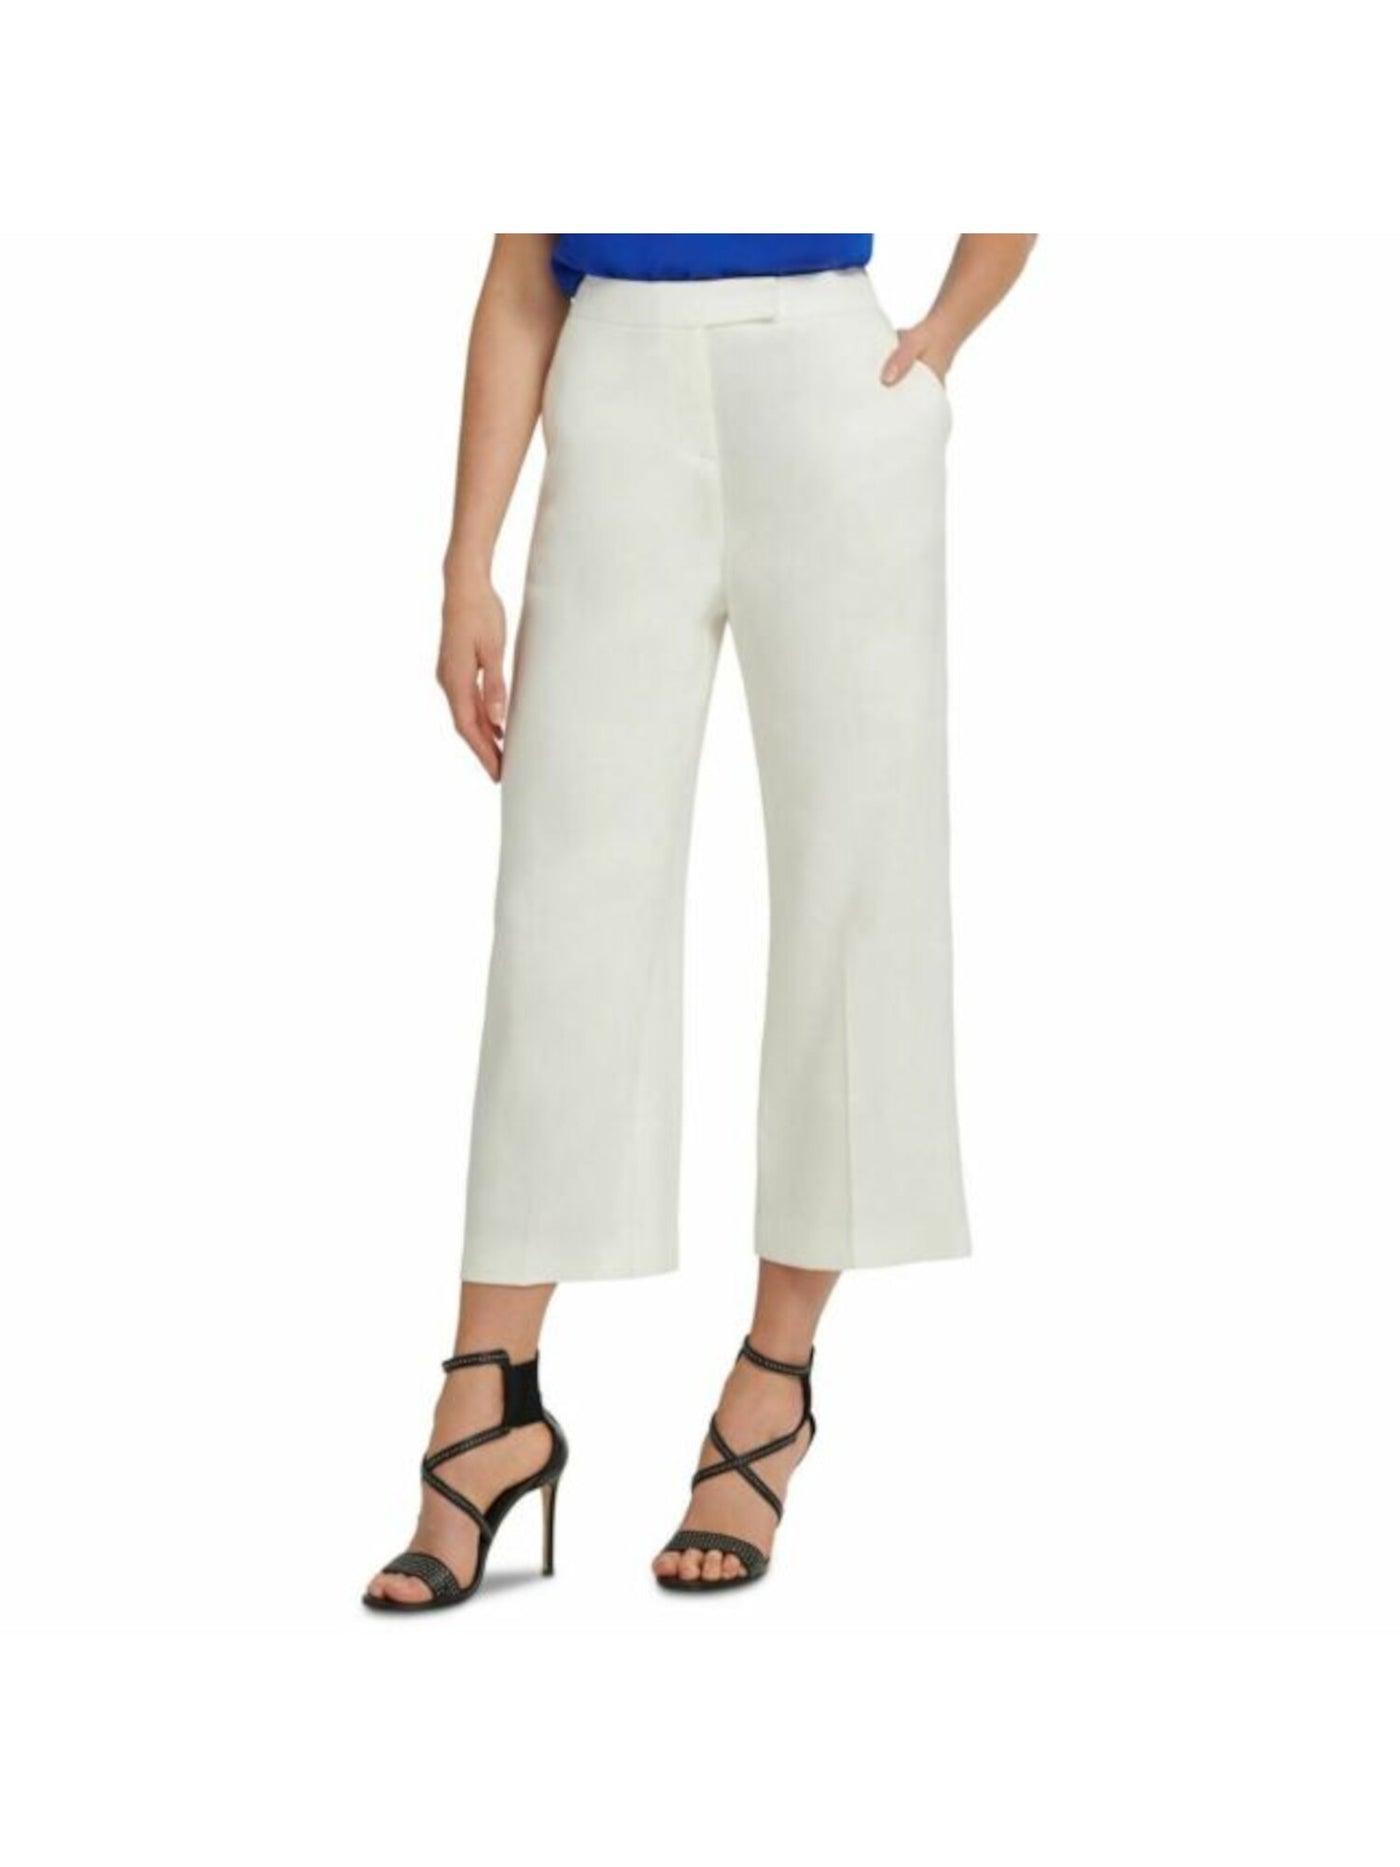 DKNY Womens Ivory Zippered Satin Cropped Evening Wide Leg Pants 14